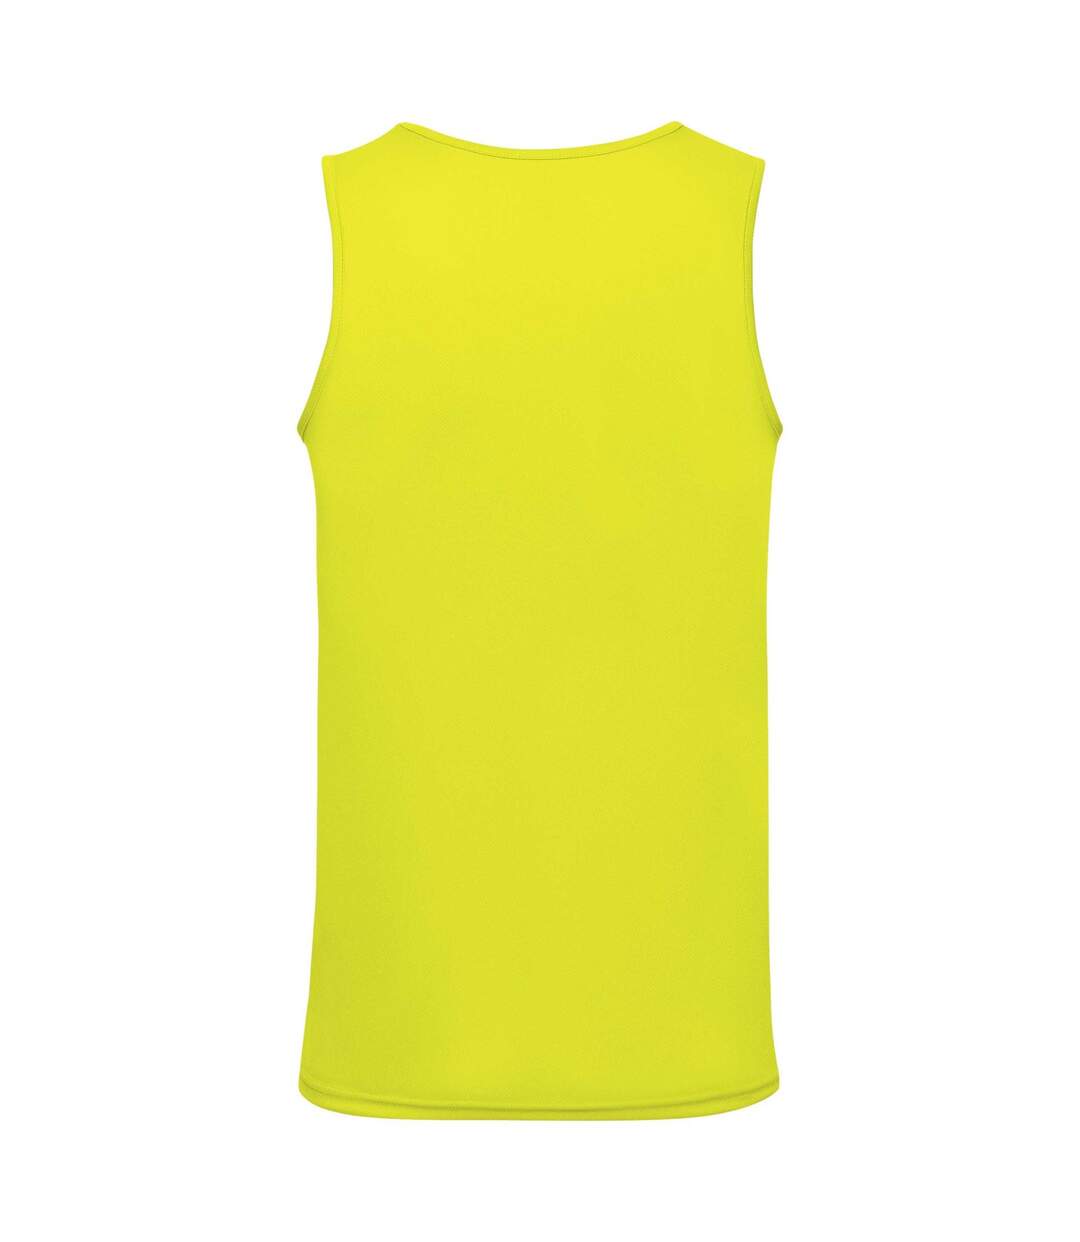 Fruit Of The Loom Mens Moisture Wicking Performance Vest Top (Bright Yellow)